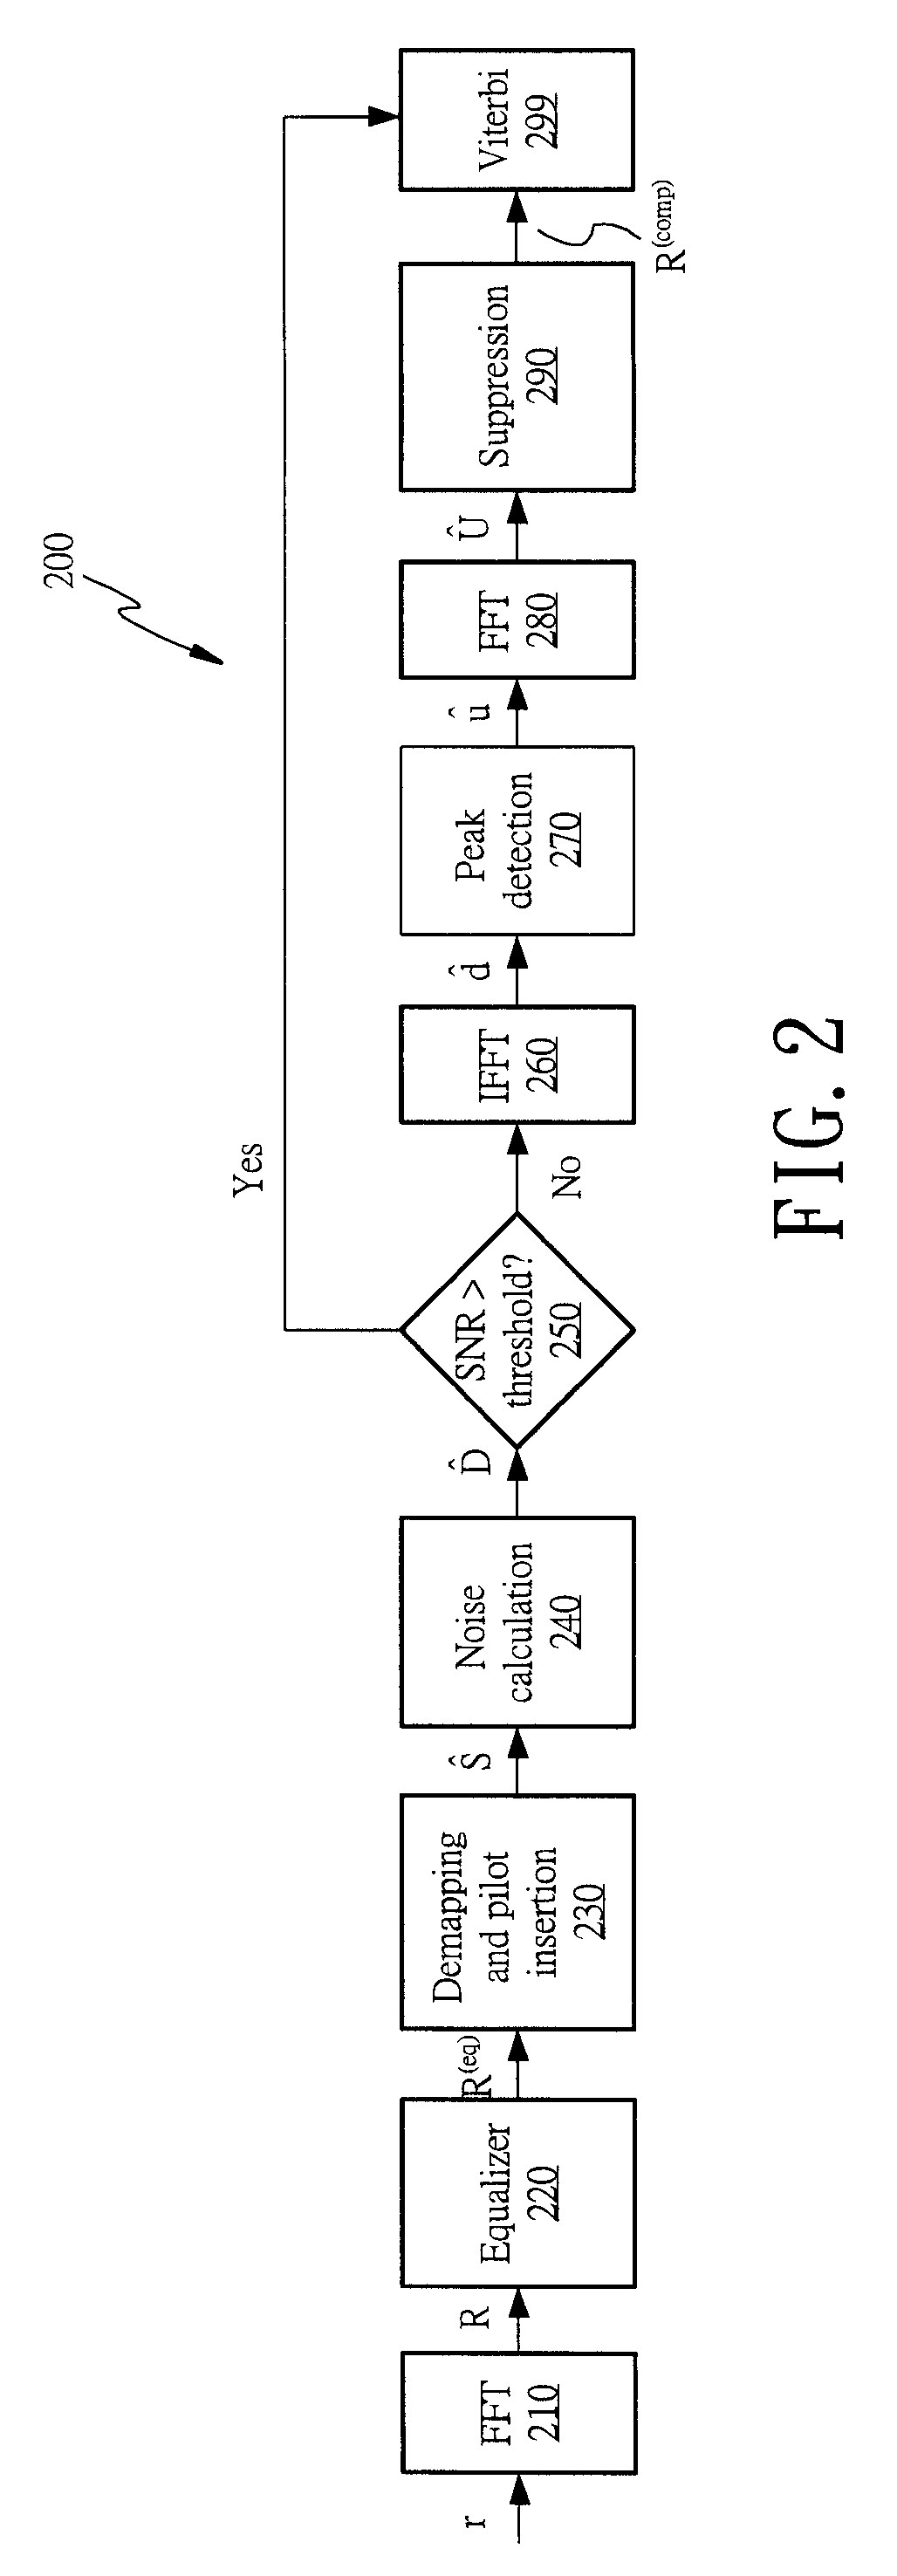 Impulsive noise suppression scheme in orthogonal frequency division multiplexing